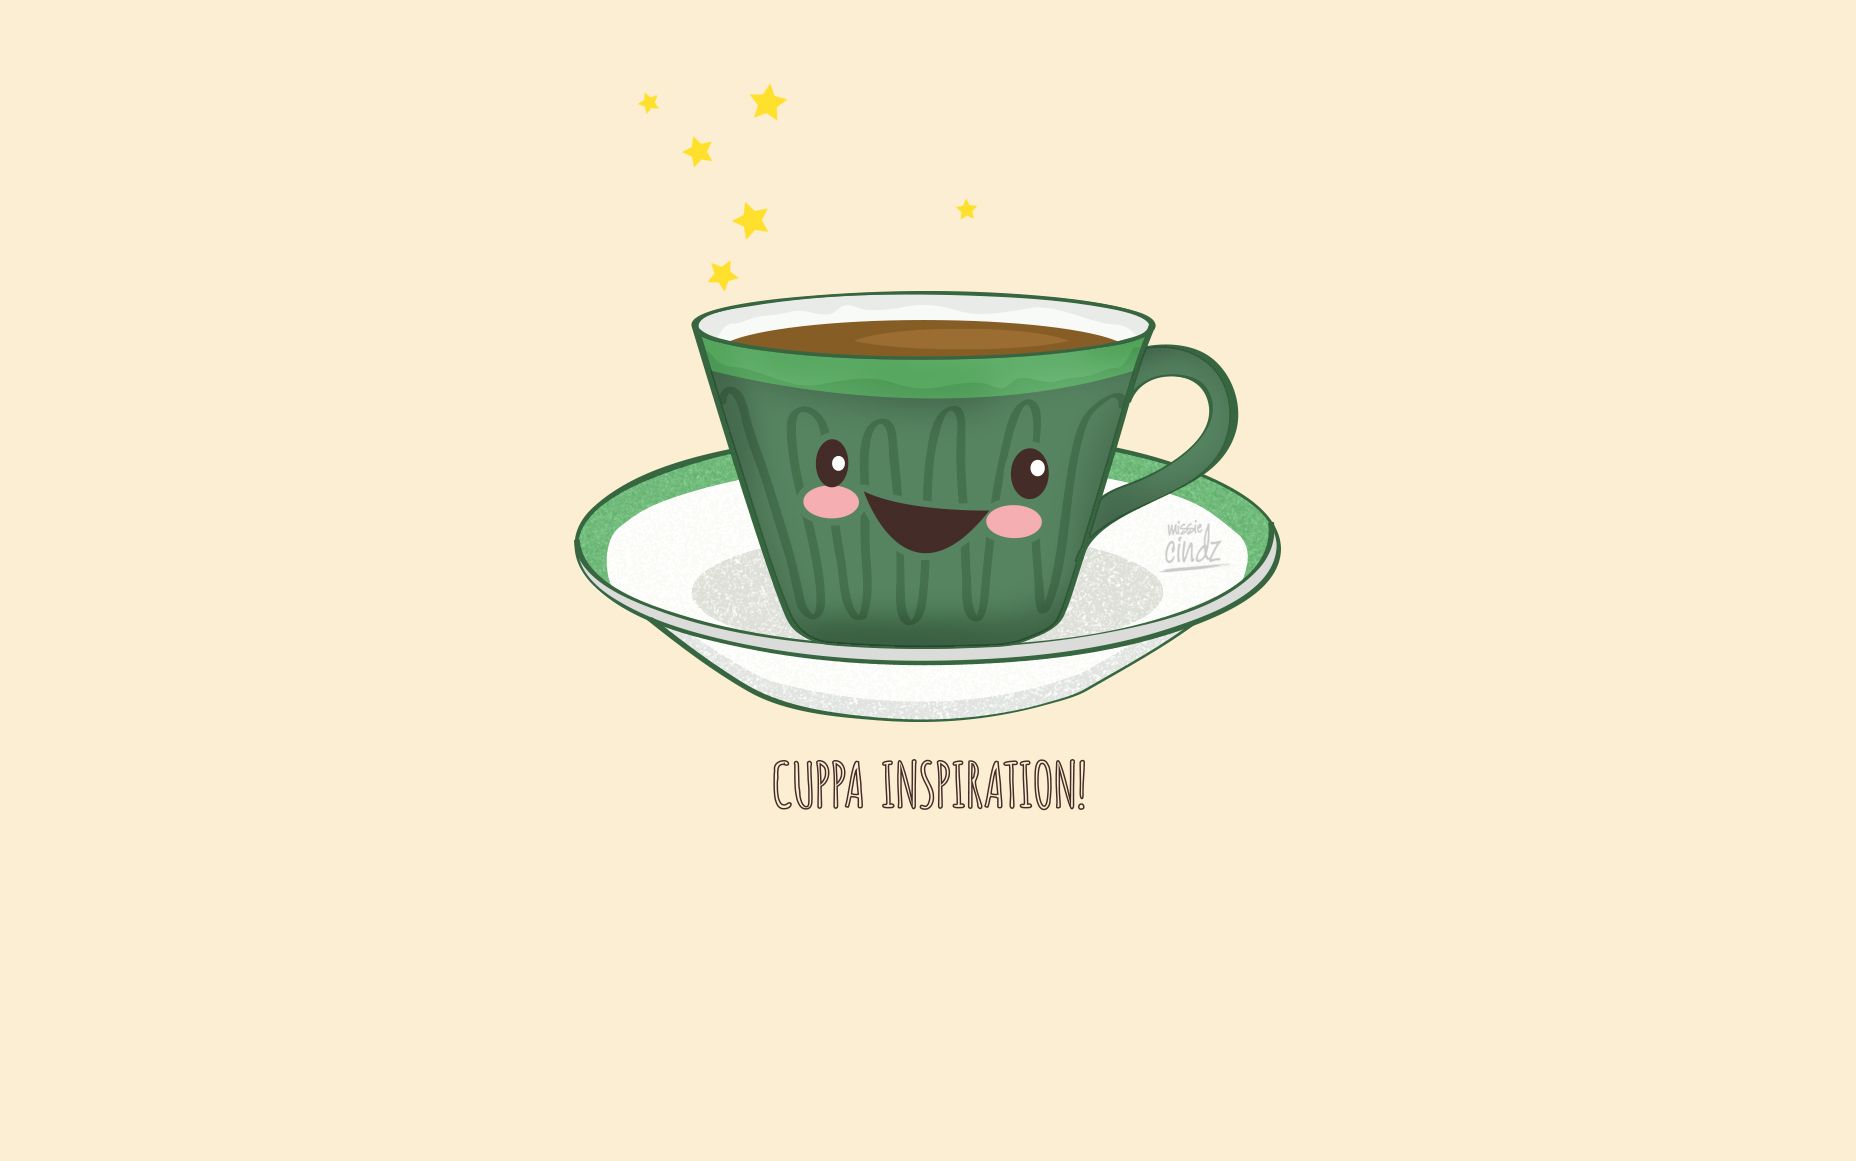 Coffee Aesthetic Wallpaper Illustration Images  Free Photos PNG Stickers  Wallpapers  Backgrounds  rawpixel